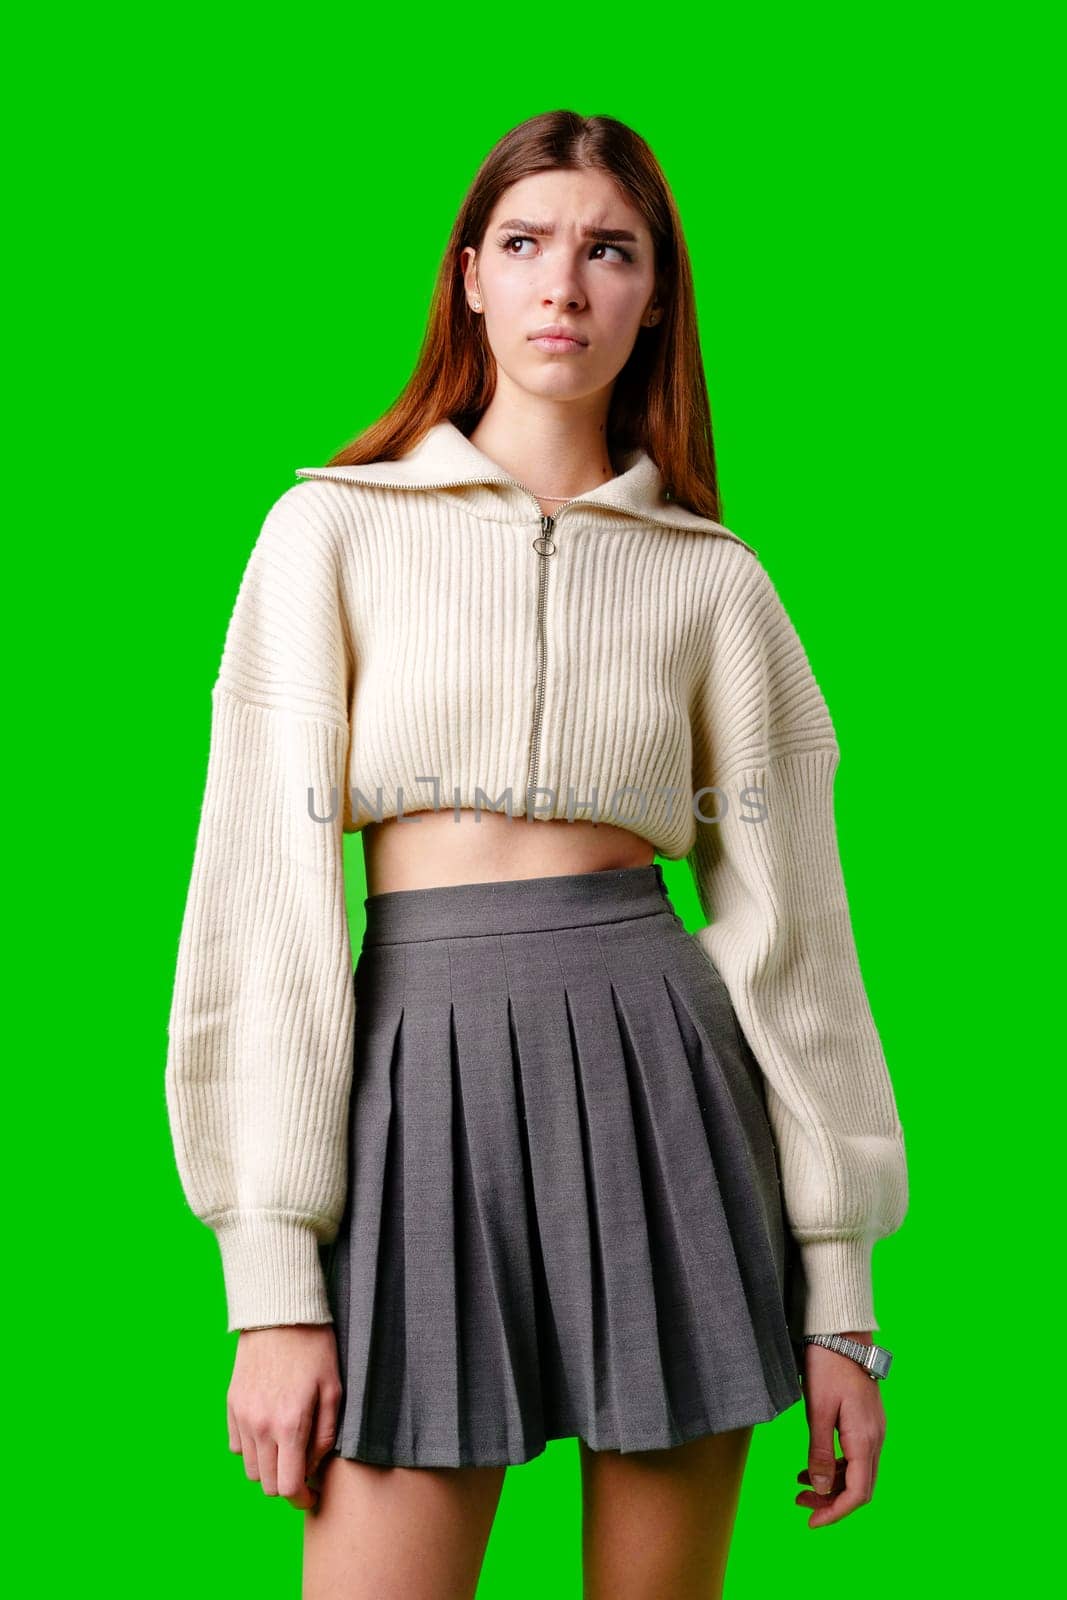 Woman in Skirt and Sweater Standing Against Green Background by Fabrikasimf